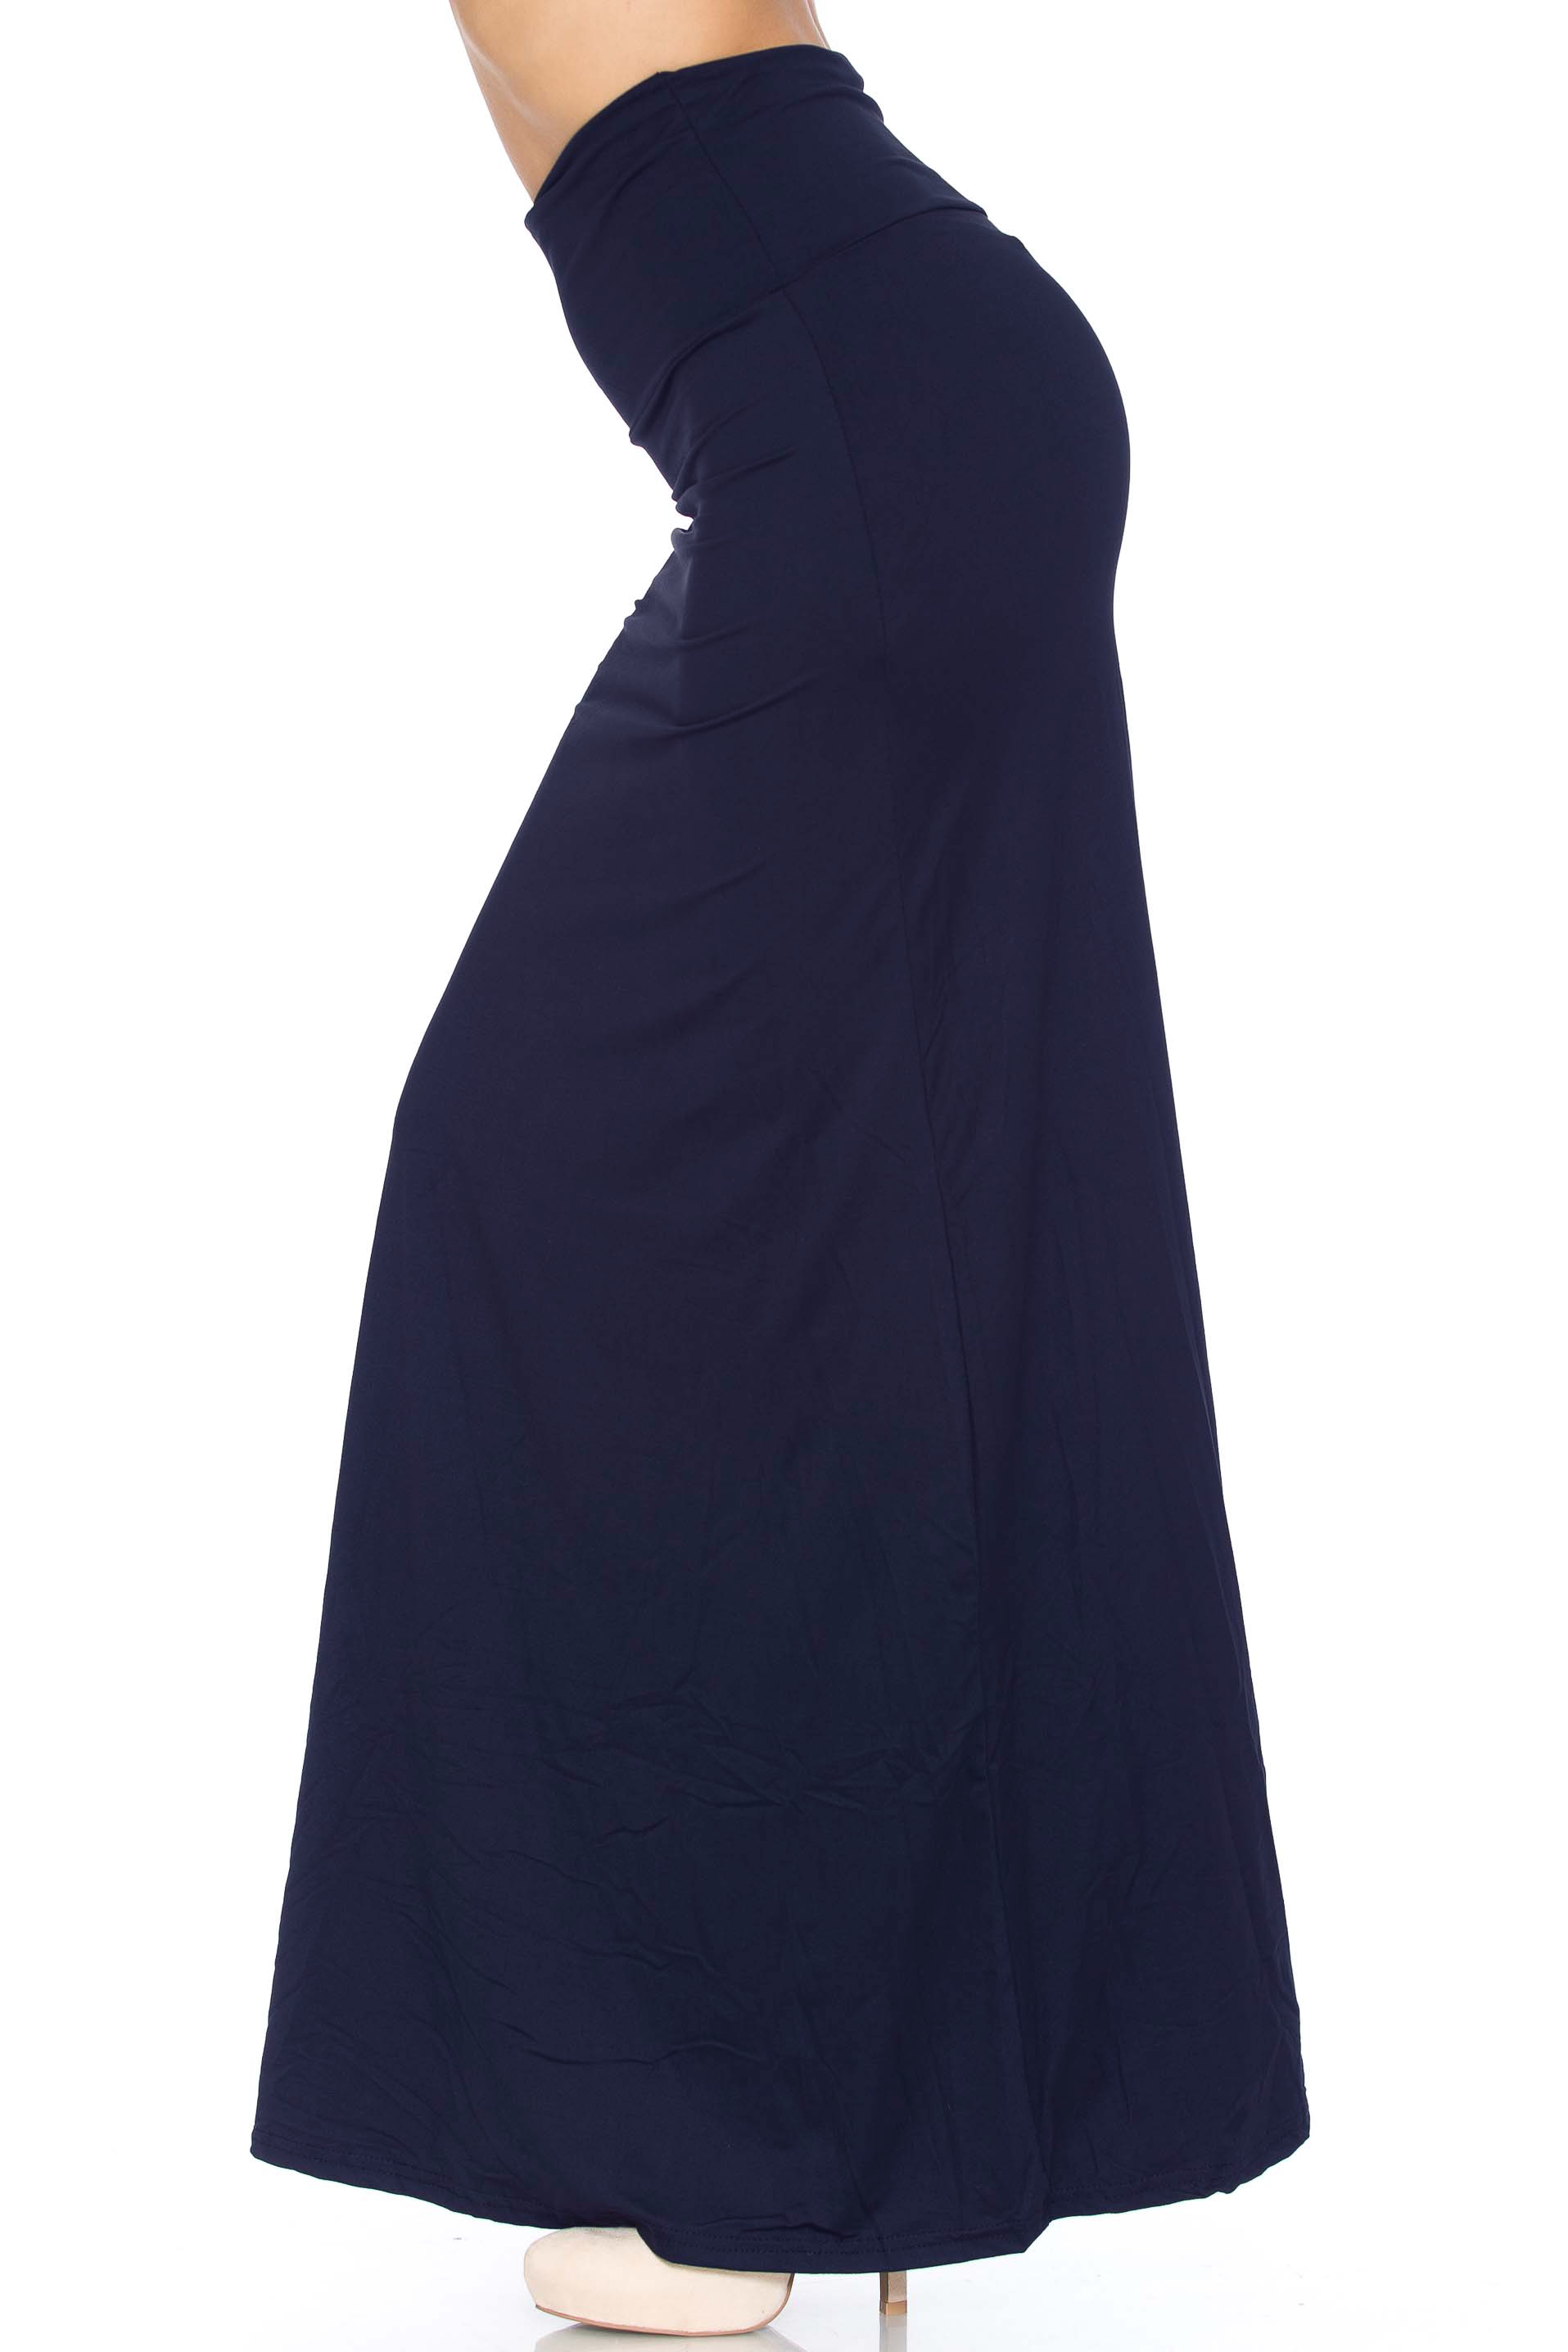 Wholesale Buttery Smooth Basic Navy Maxi Skirt